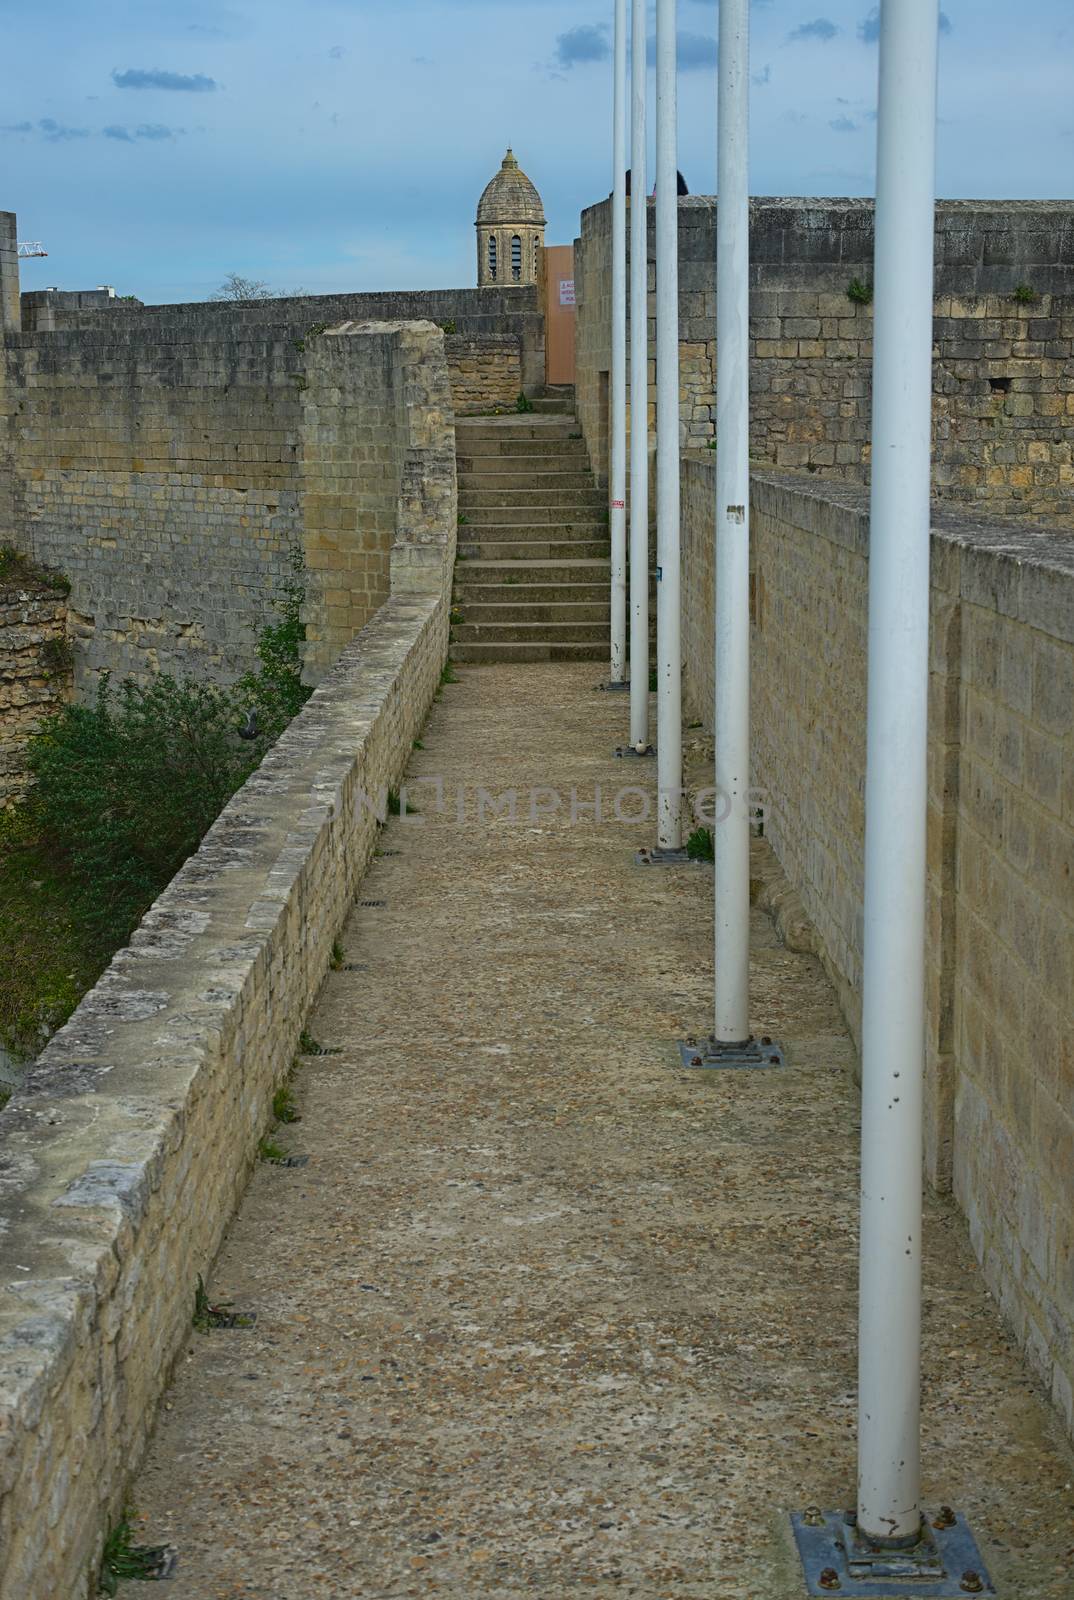 Stone pathway through fortress defensive wall at Caen, France by sheriffkule